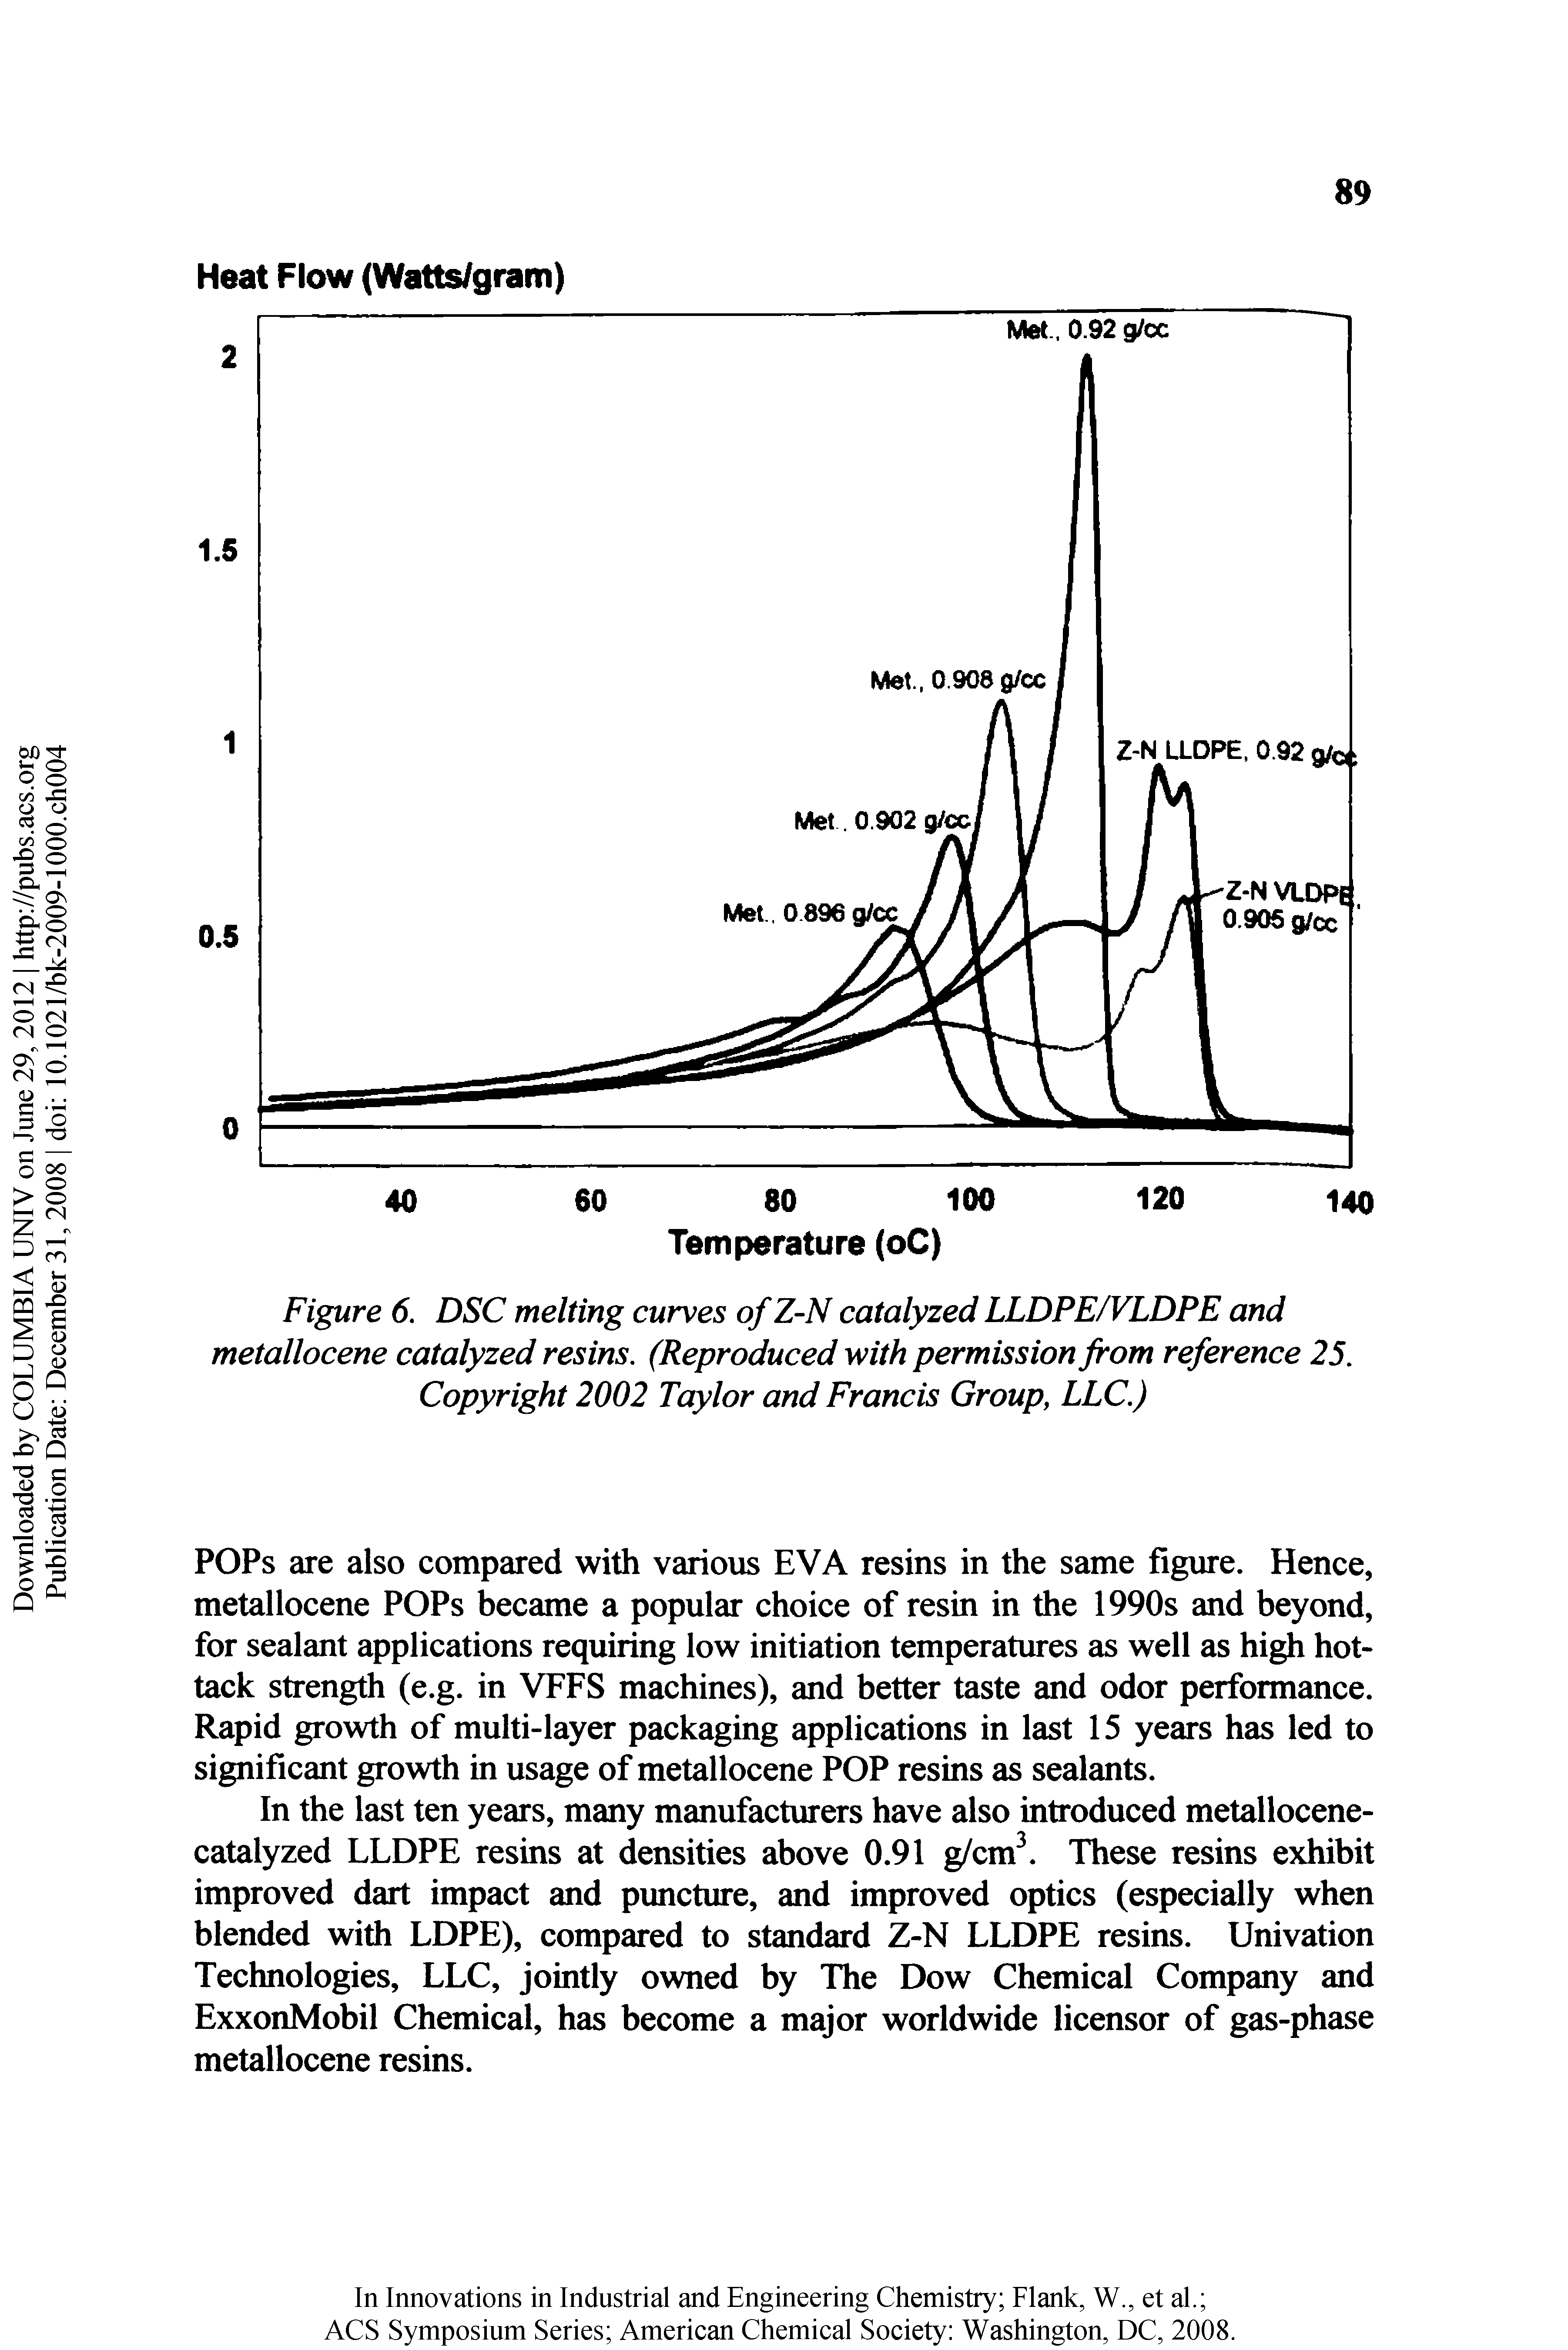 Figure 6. DSC melting curves of Z-N catalyzed LLDPE/VLDPE and metallocene catalyzed resins. (Reproduced with permission from reference 25. Copyright 2002 Taylor and Francis Group, LLC.)...